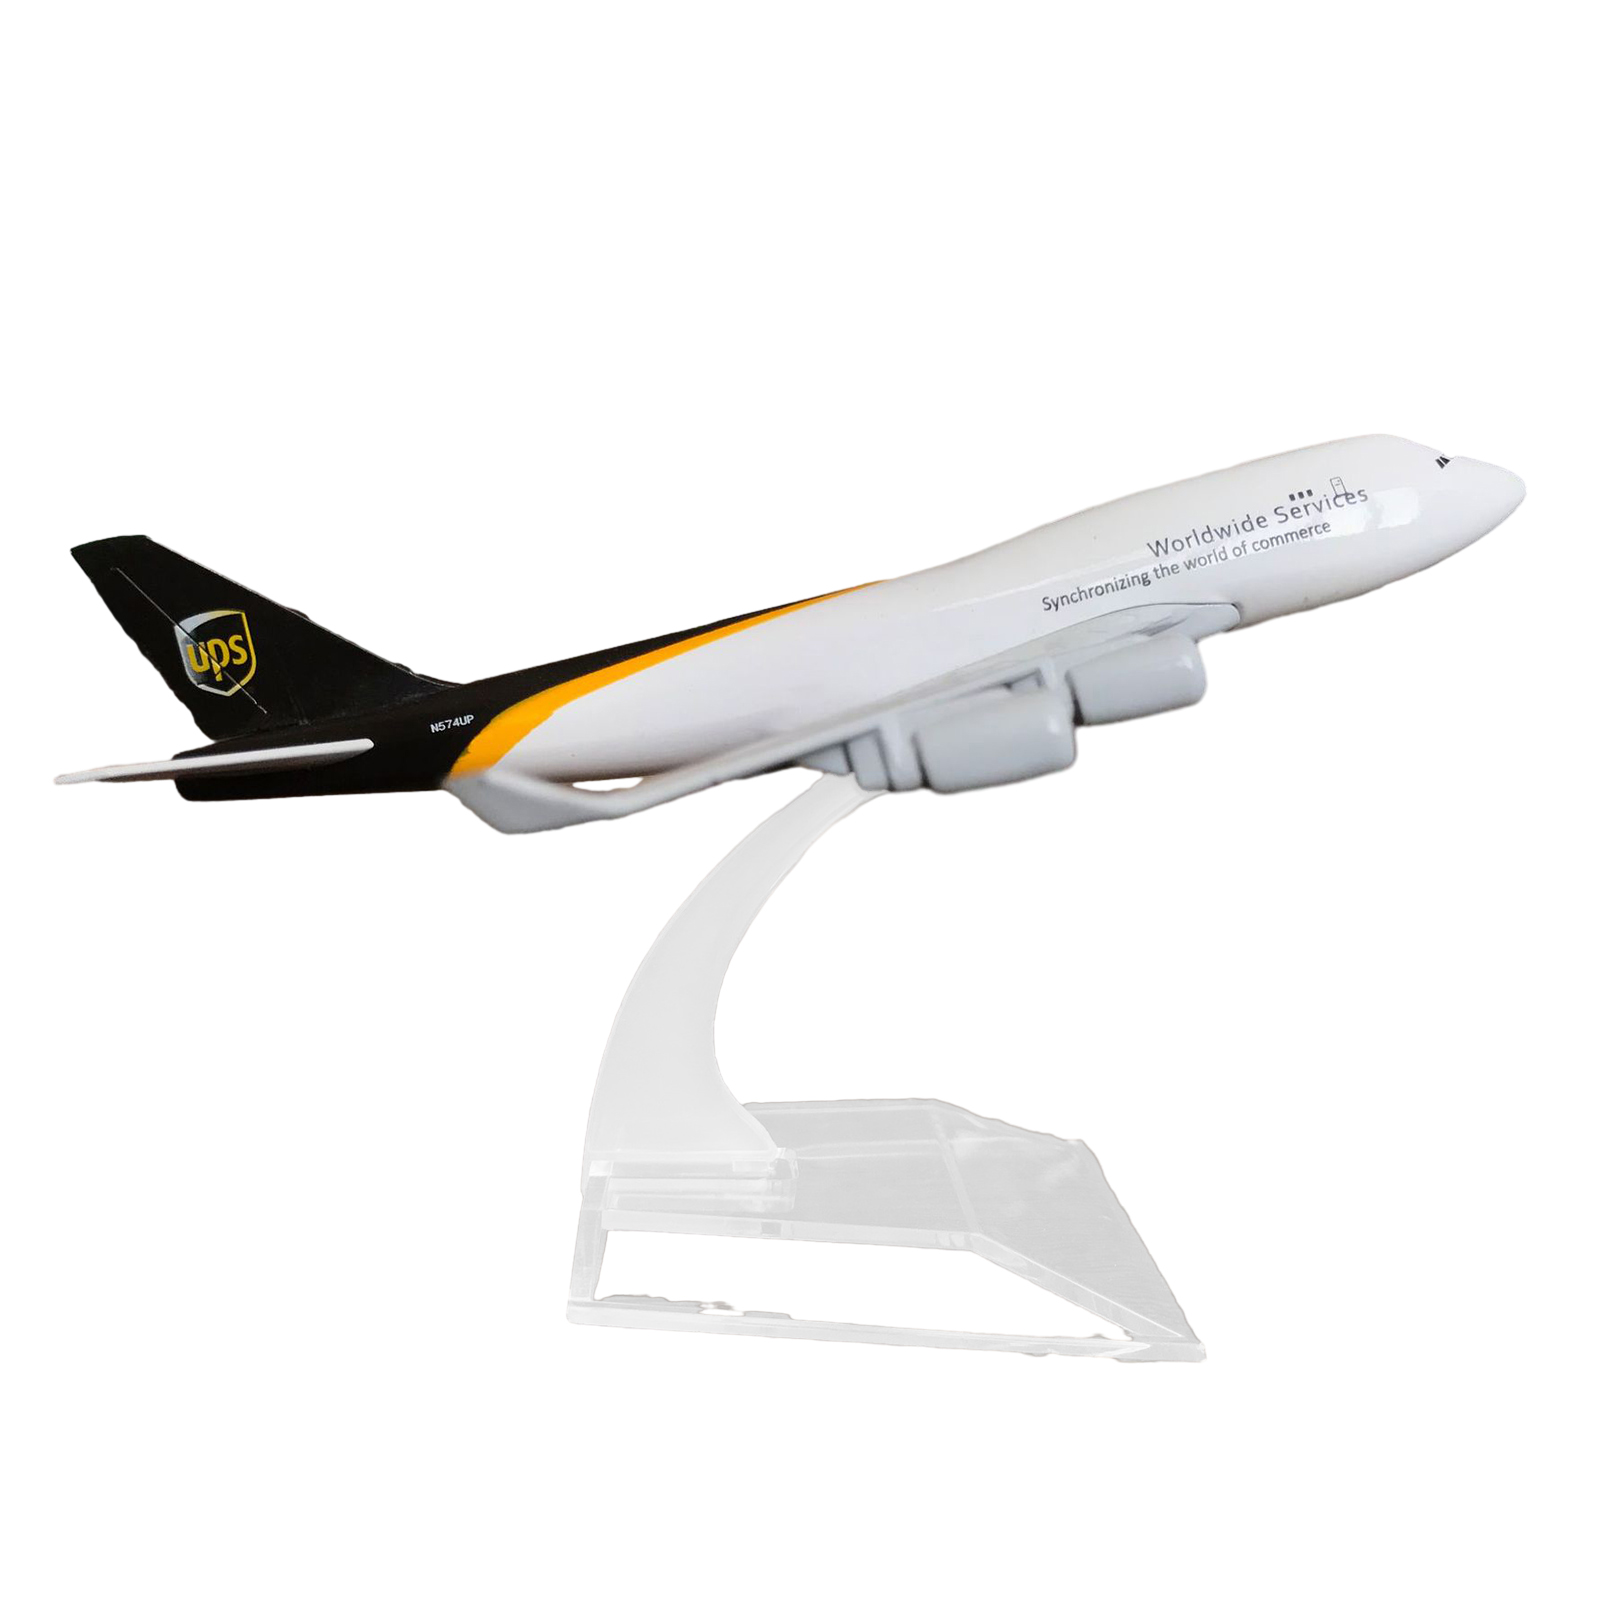 218s Collectible Aircraft Toy Alloy Aircraft Model 1 400 B747 Airplane